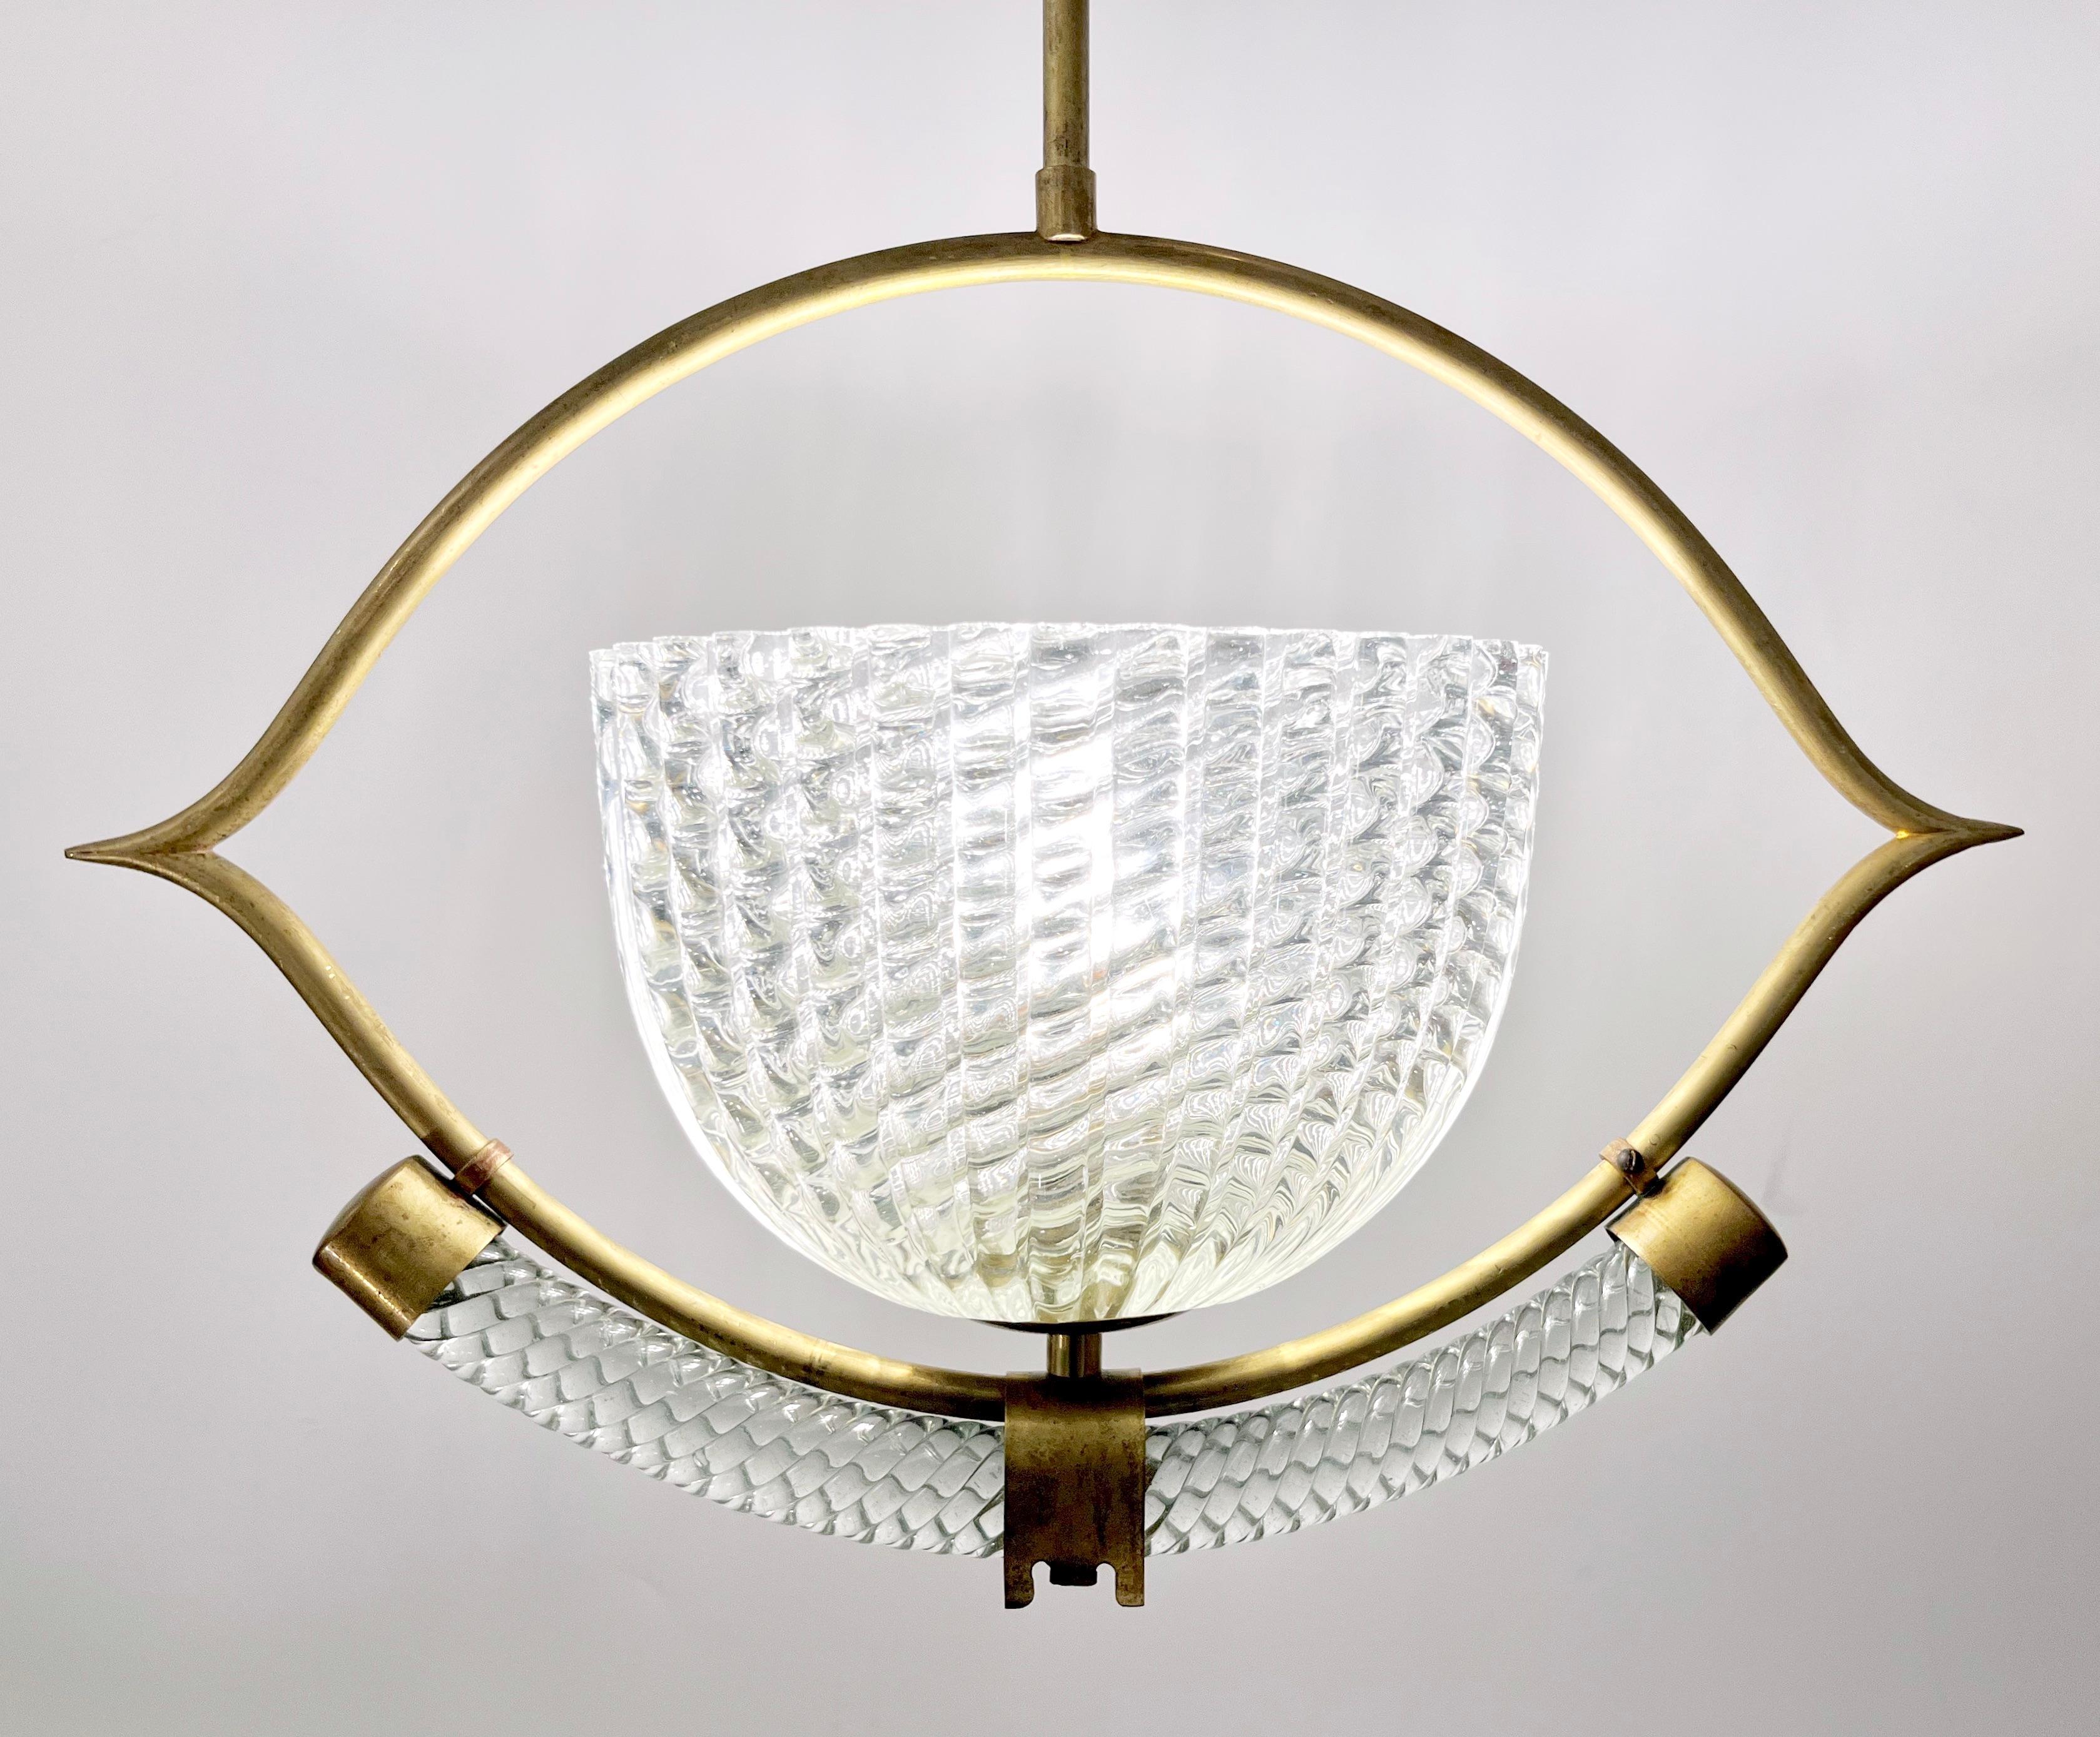 Hand-Crafted 1940s, Antique Italian Art Deco Barovier Crystal Murano Glass Basket Chandelier